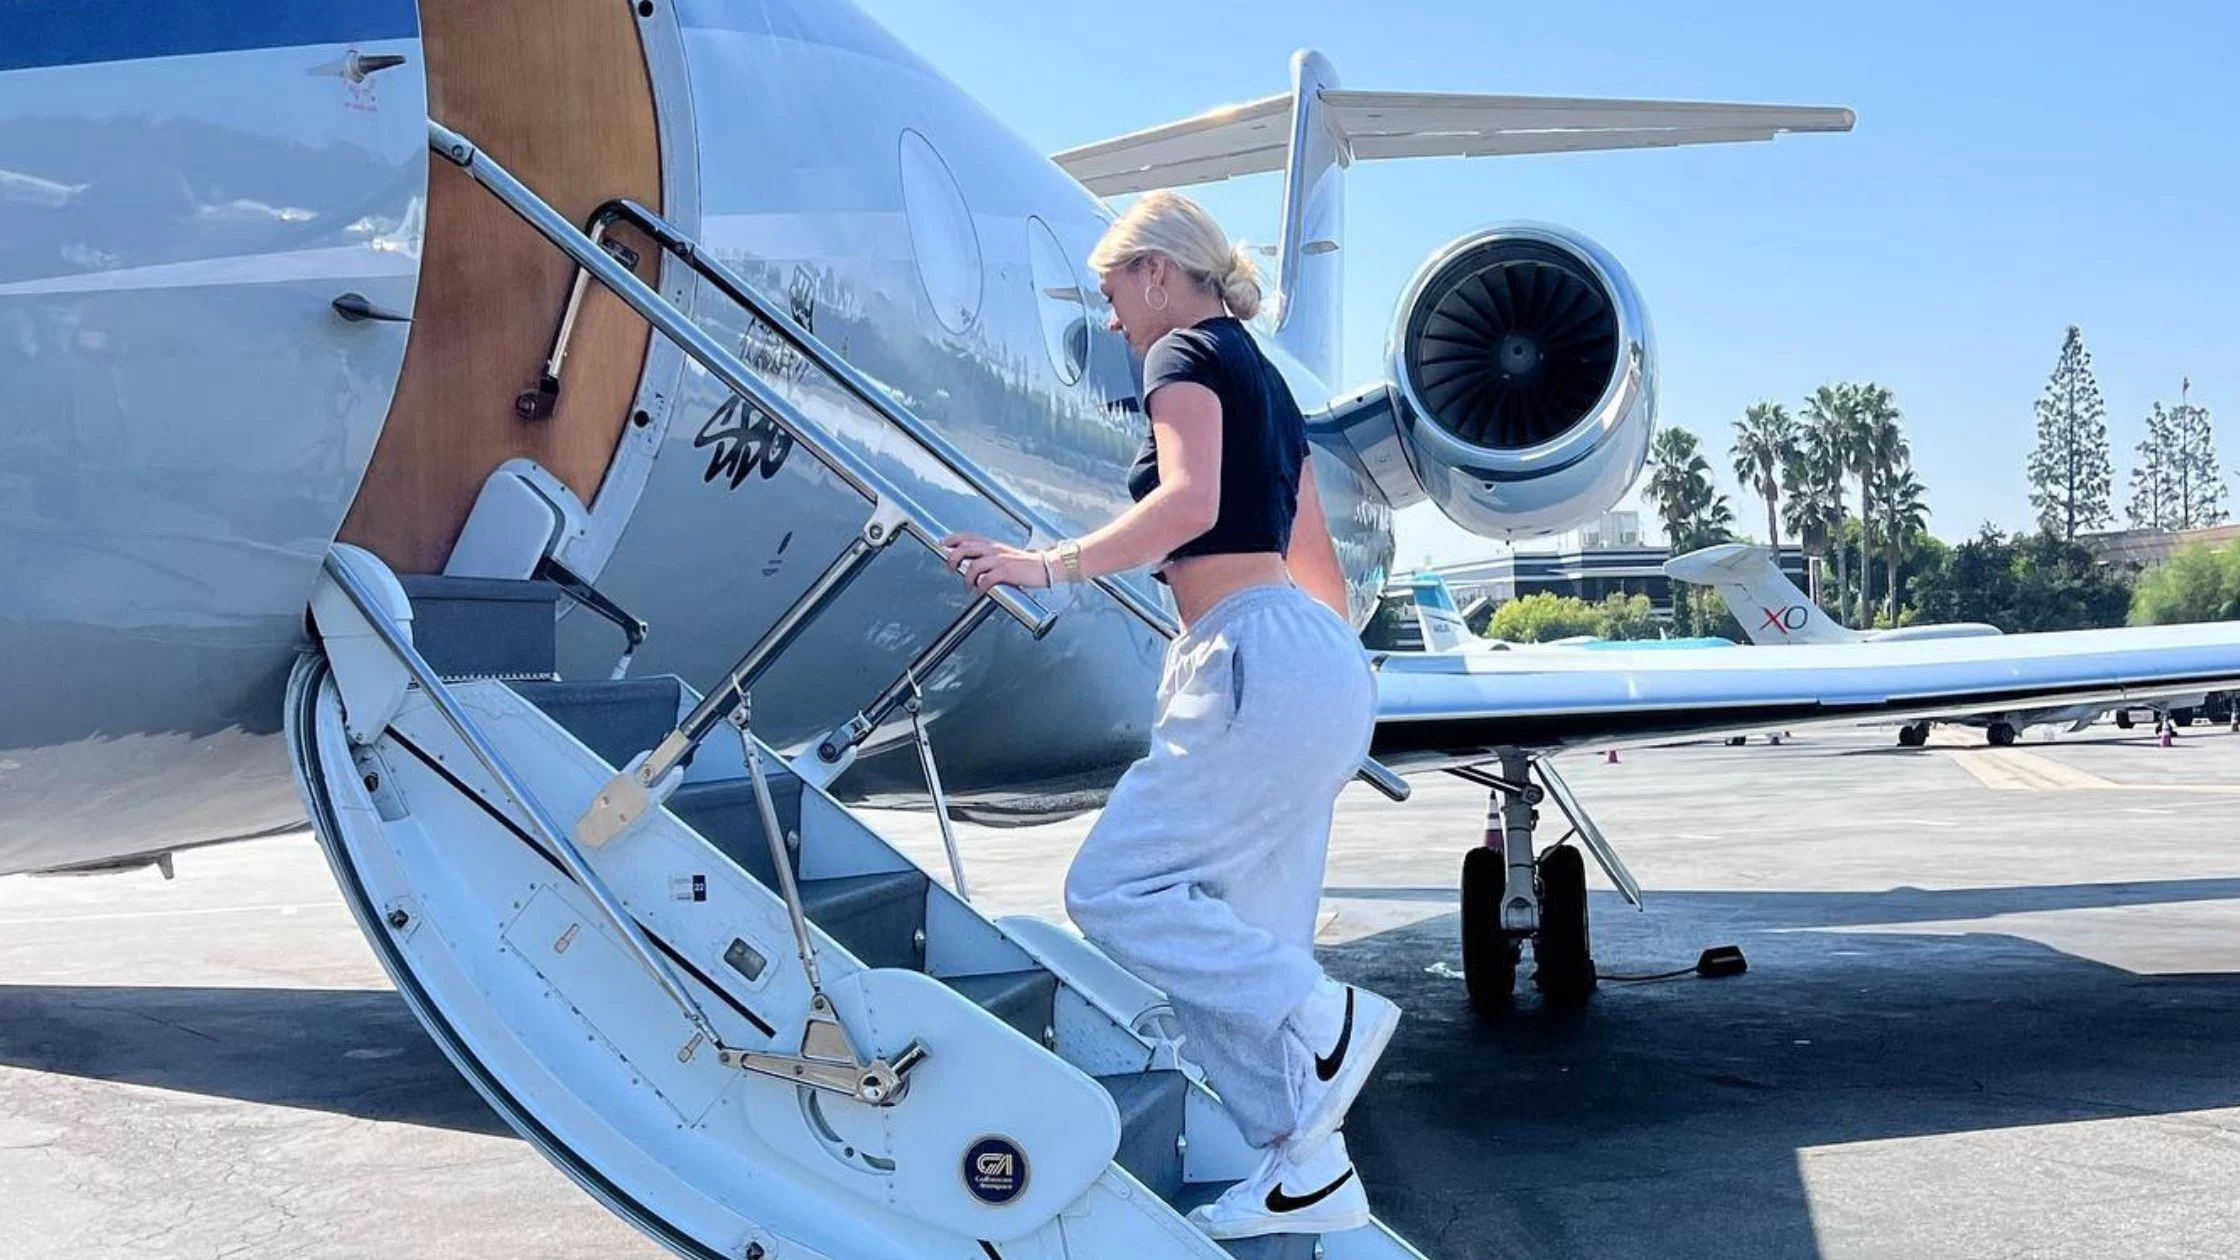 Katie climbing the stairs of her private plane. 